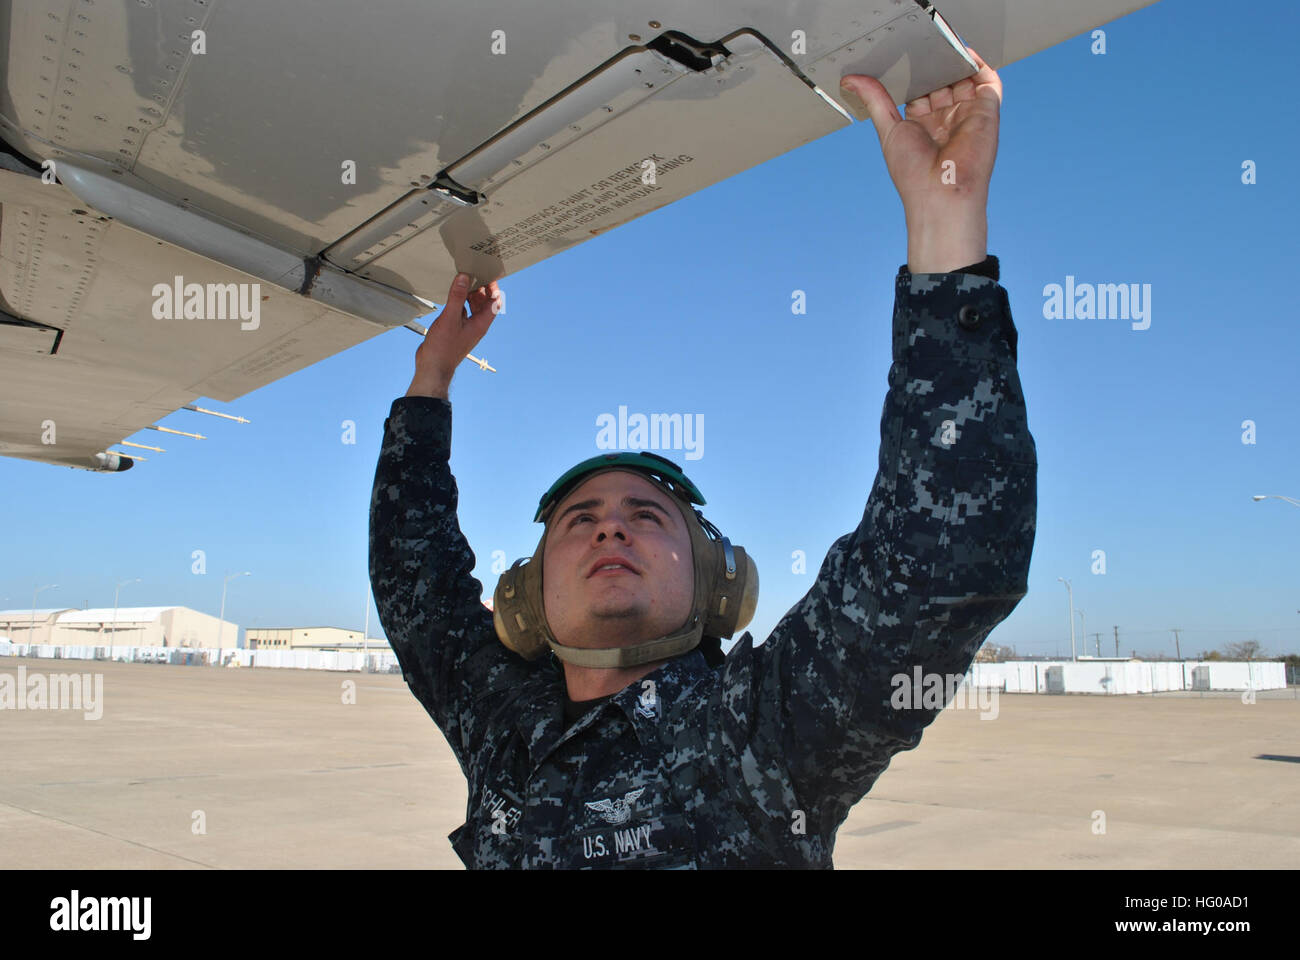 111207-N-GO535-115  FORT WORTH, Texas (Dec. 7, 2011) Aviation Machinist's Mate 2nd Class Ron Dischler, assigned to Fleet Logistics Support Squadron (VR) 59, inspects the aileron assembly of a C-9B Skytrain II aircraft on the tarmac at Naval Air Station Joint Reserve Base Fort Worth. Fleet logistics support squadrons operate on a worldwide basis to provide responsive, flexible, and rapid deployable air logistics support required to sustain combat operations at sea. (U.S. Navy photo by Mass Communication Specialist 2nd Class Ron Kuzlik/Released) US Navy 111207-N-GO535-115 Aviation Machinist's Ma Stock Photo